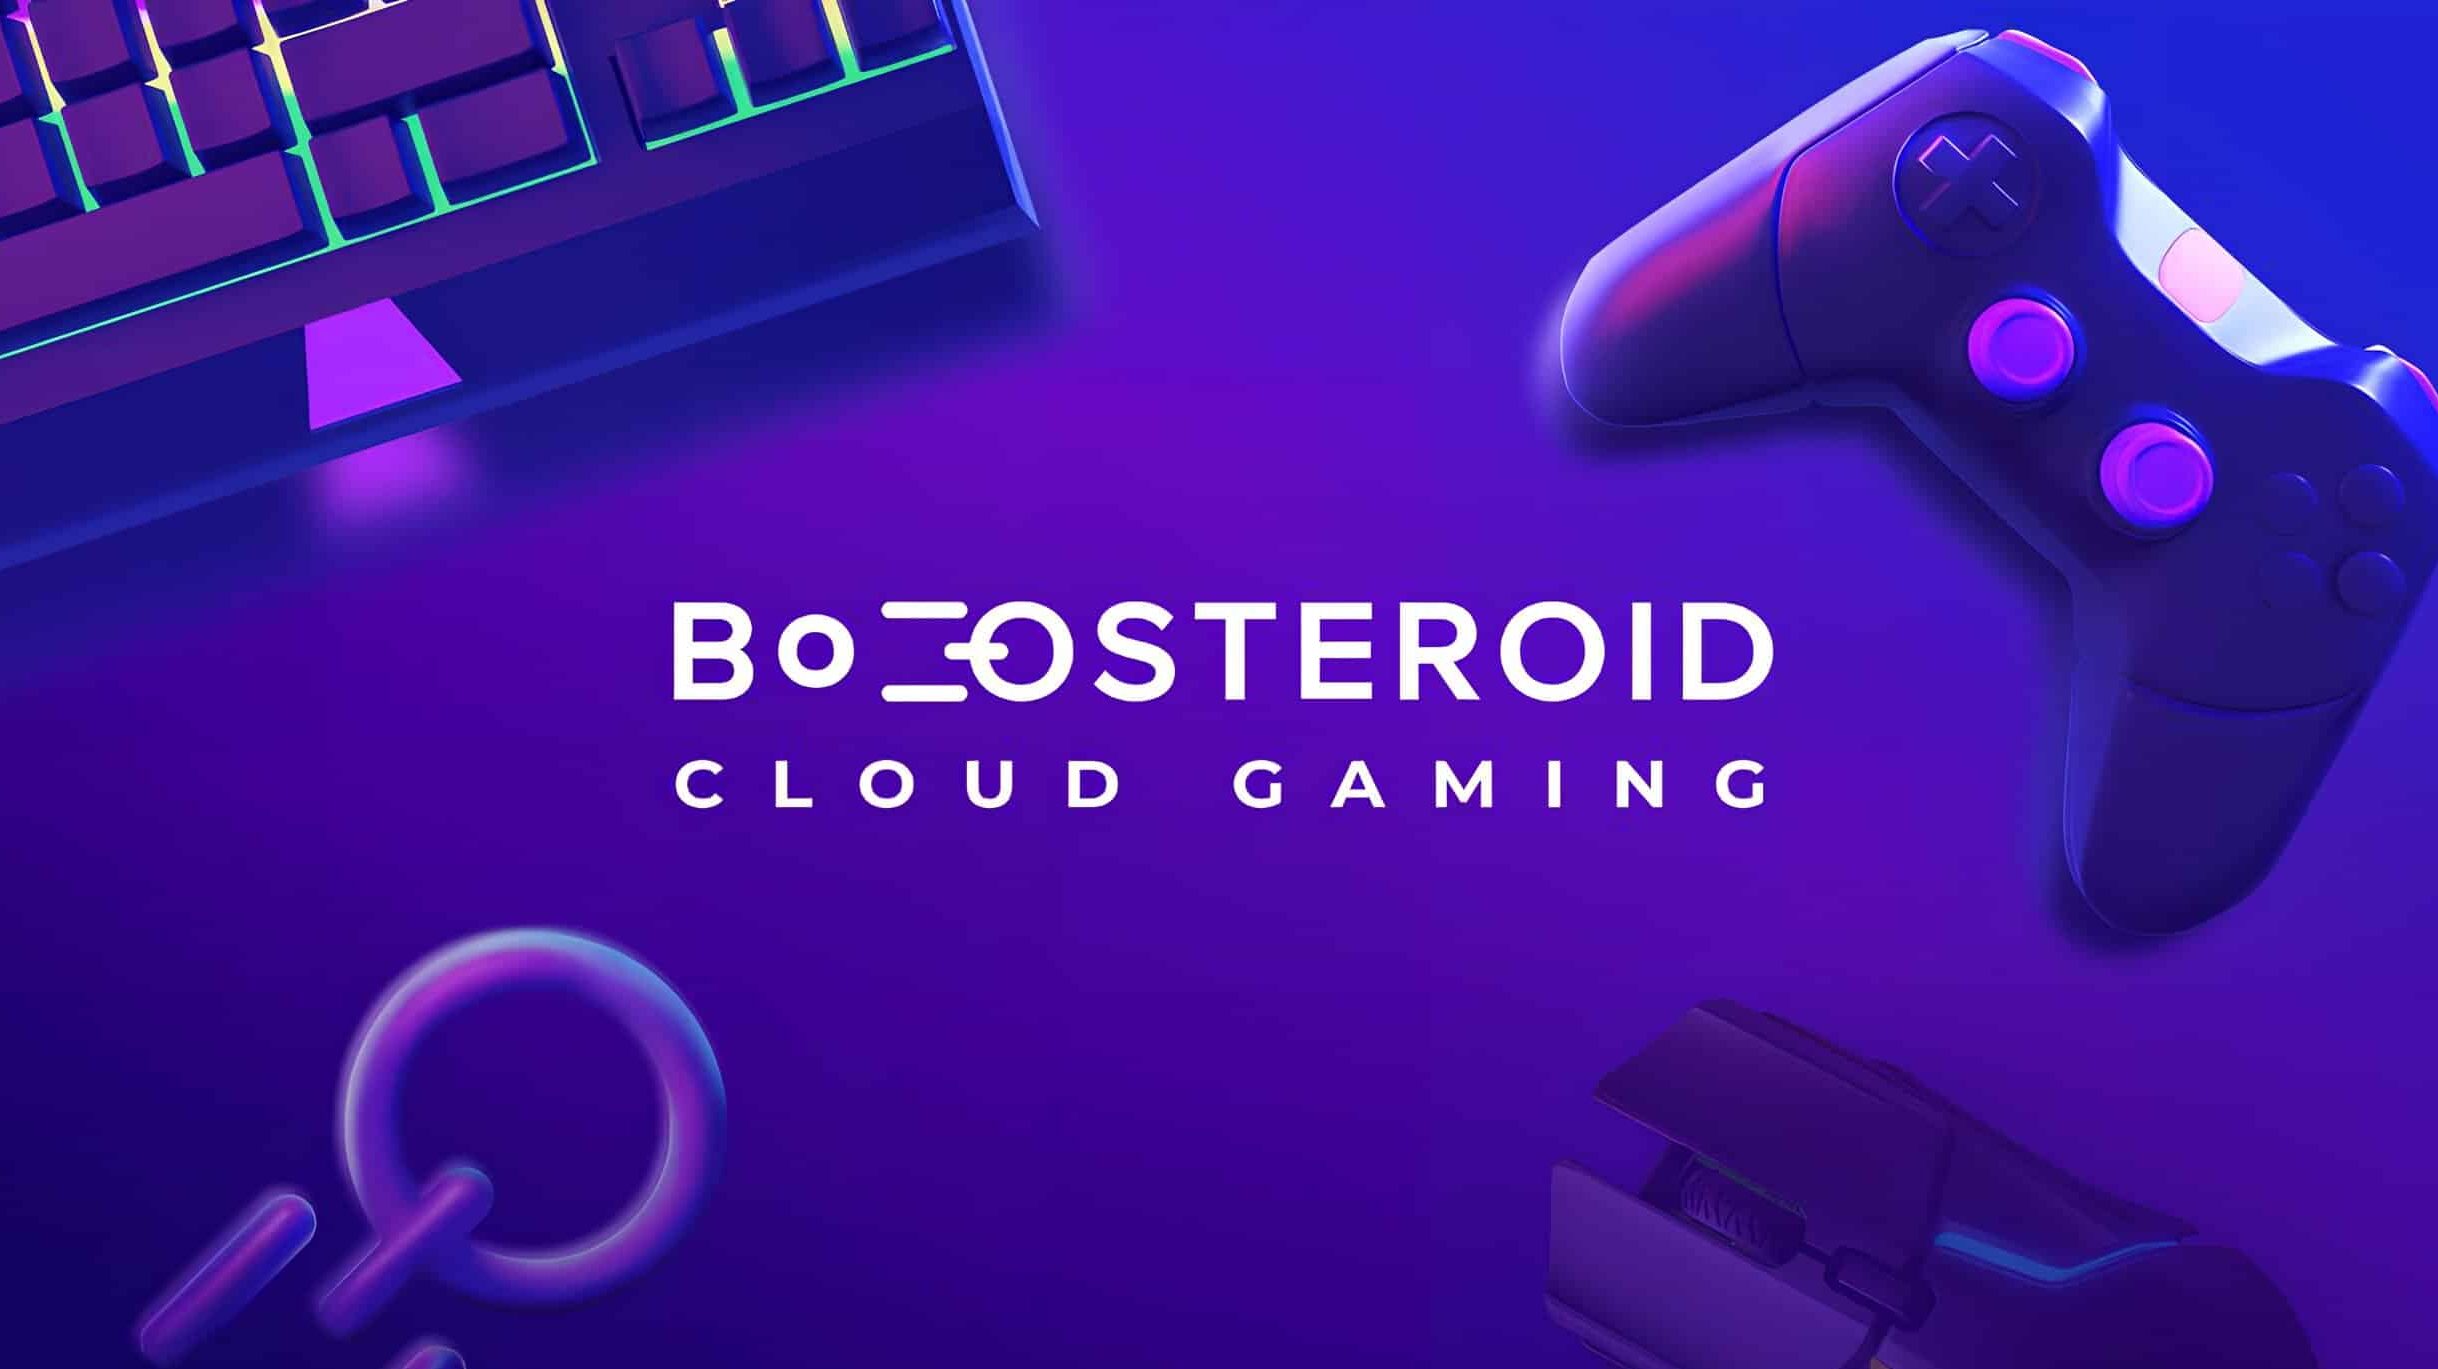 7 New Games Added to Boosteroid - Cloud Dosage